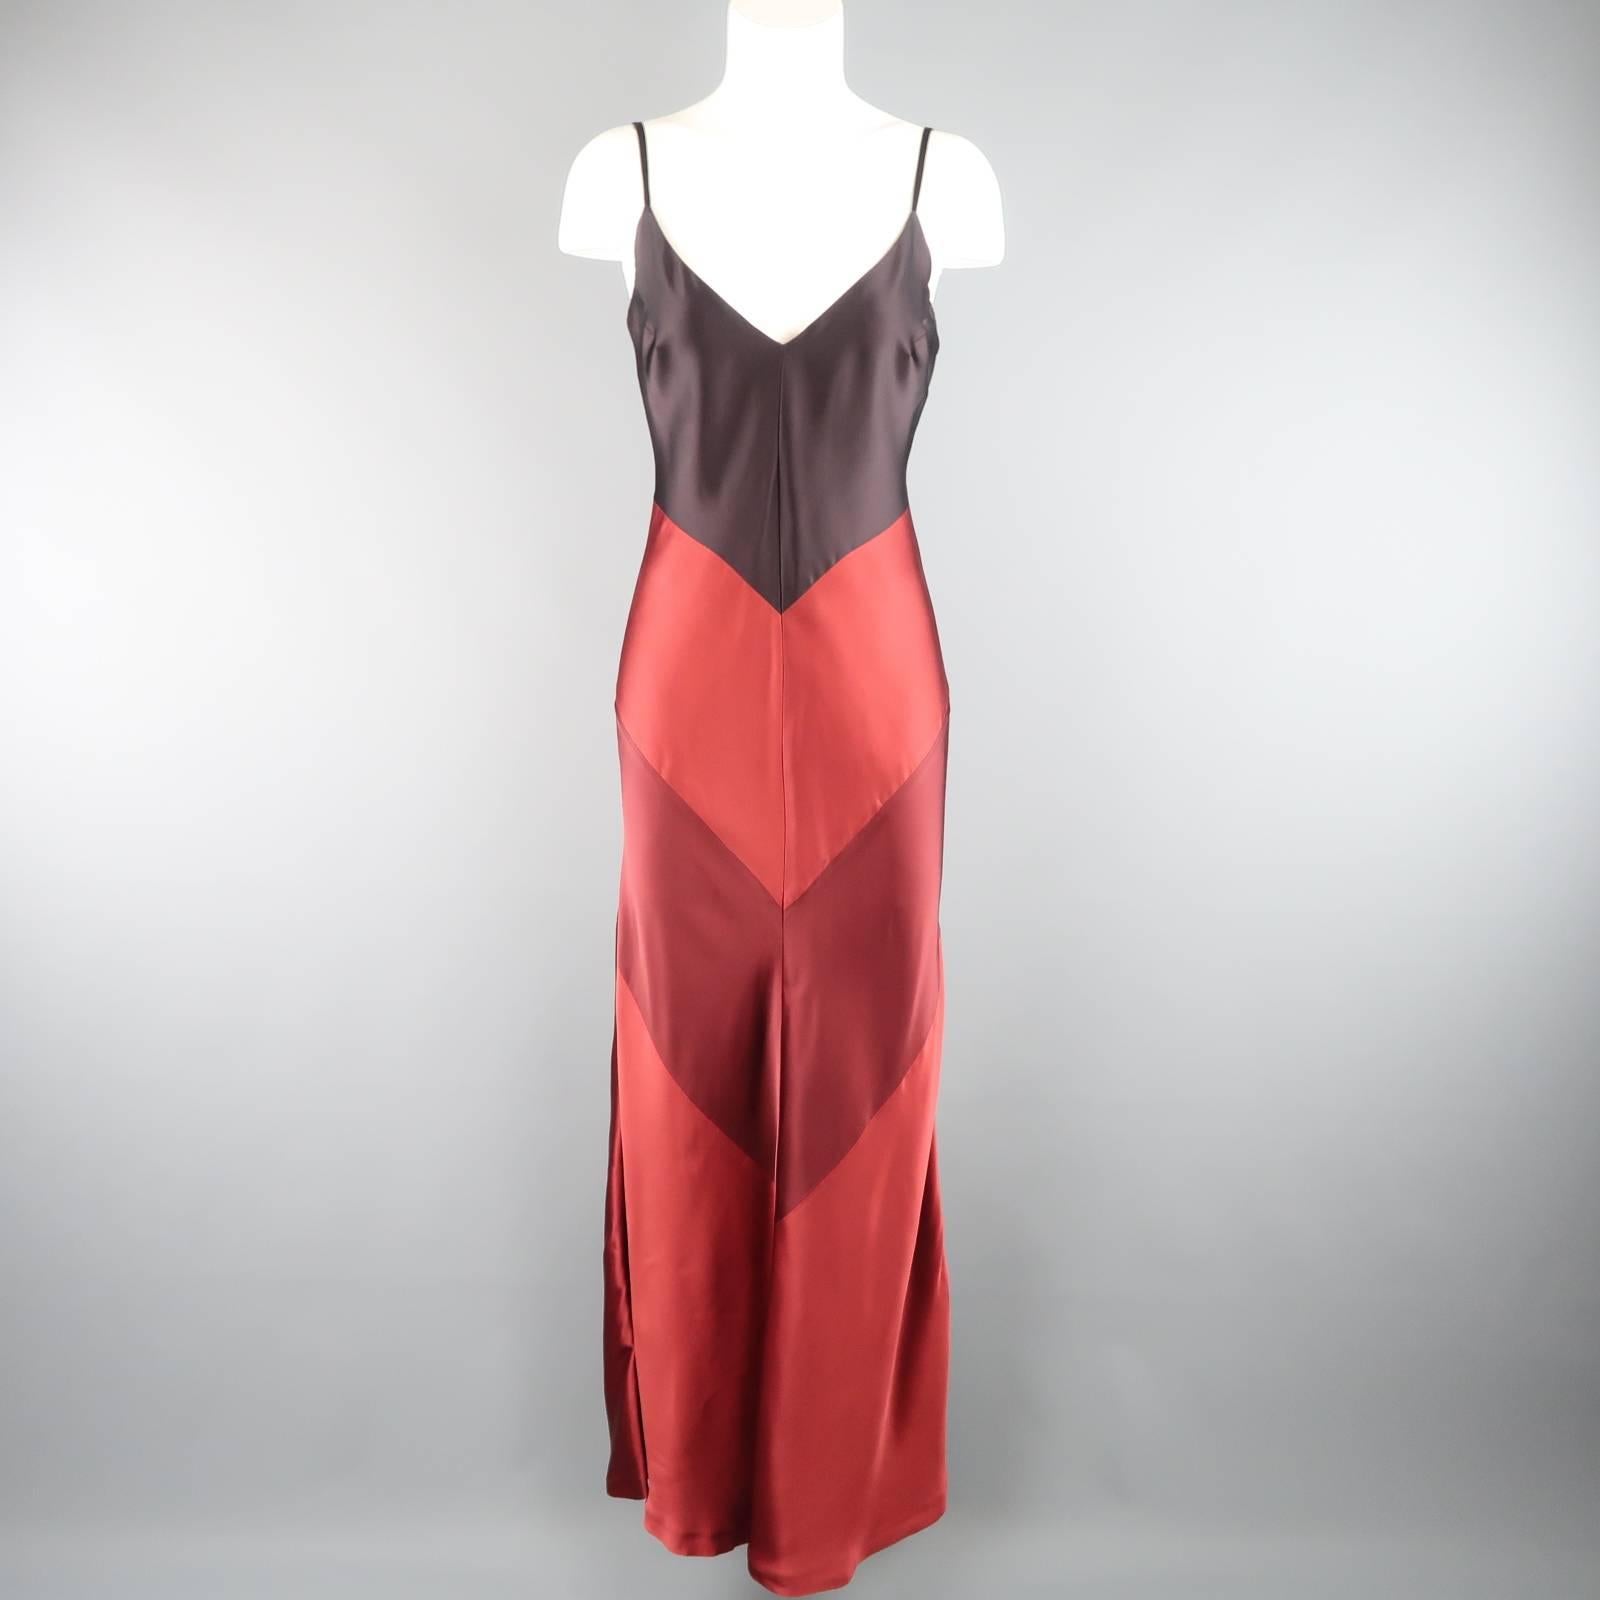 MAX MARA evening maxi dress comes in plum purple and red color block satin and features a V neckline and patchwork construction. Includes matching sash. Made in Italy.
 
Excellent Pre-Owned Condition.
Marked: IT 40
 
Measurements:
 
Bust: 36